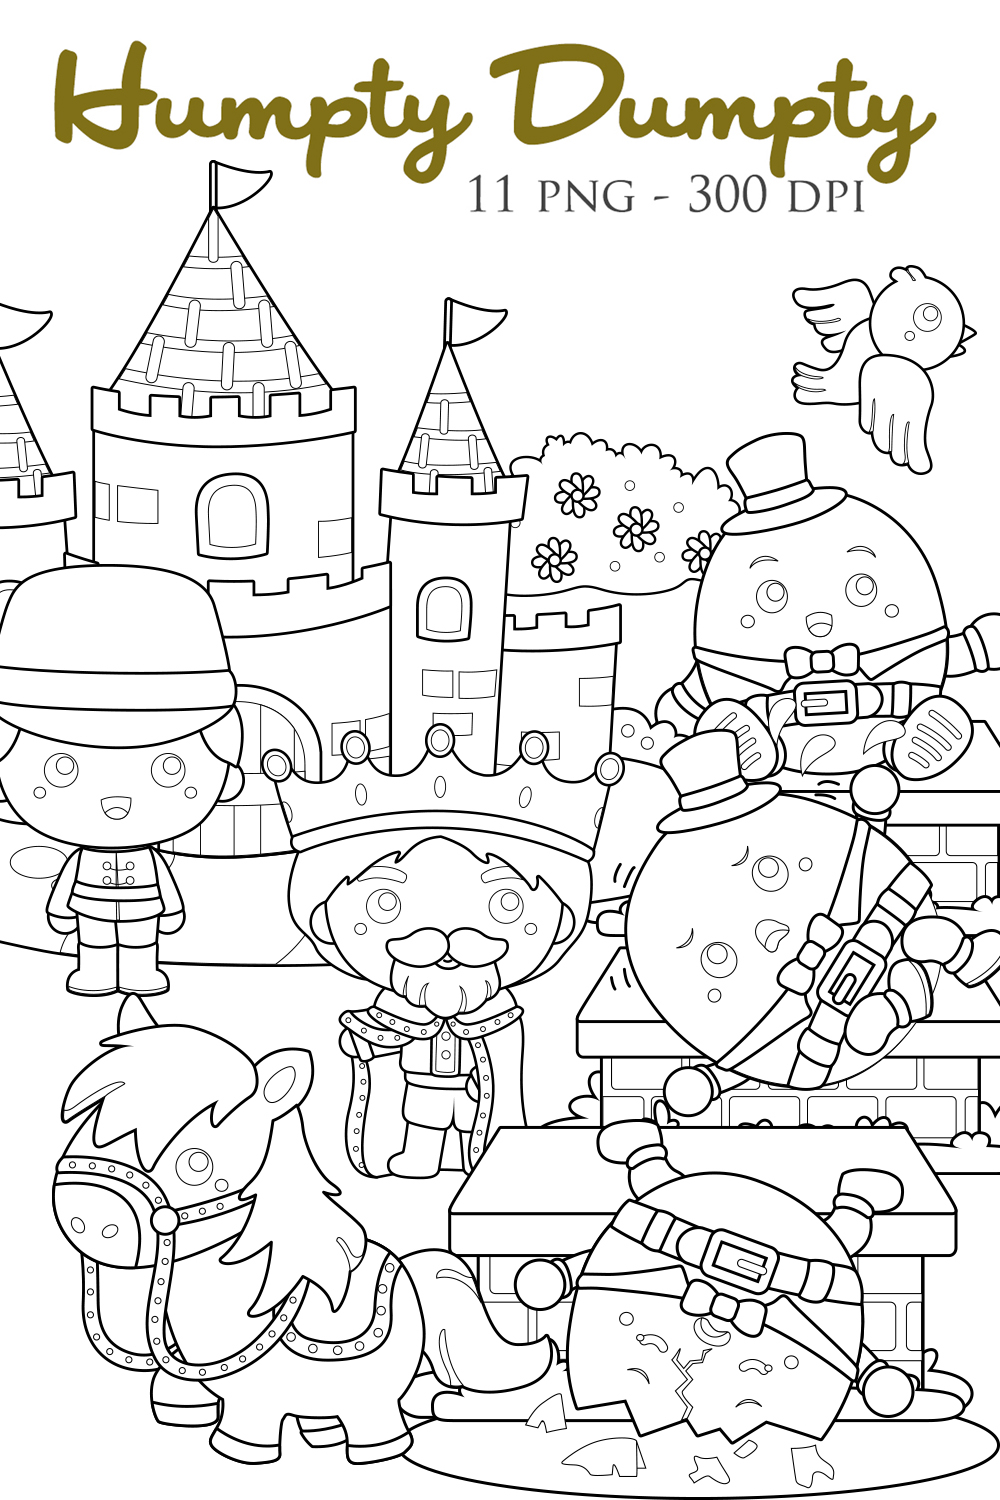 Humpty Dumpty Classic Rhymes Song Story Kids Colorful Scrapbook Digital Stamp pinterest preview image.